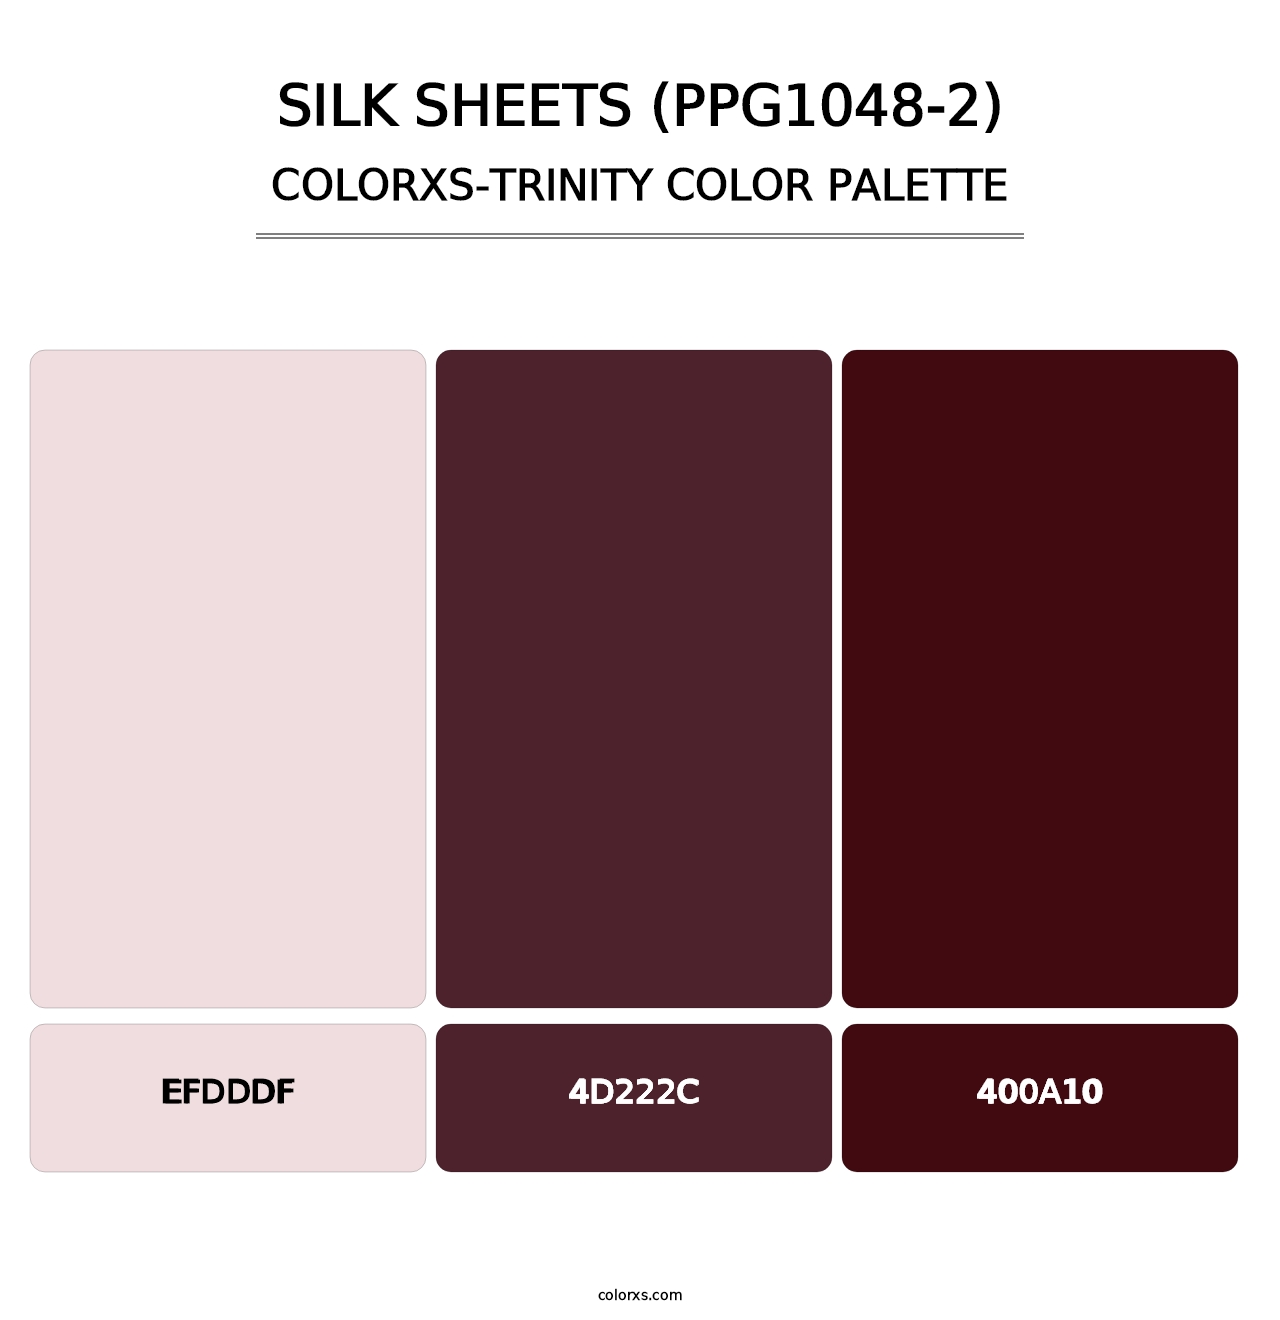 Silk Sheets (PPG1048-2) - Colorxs Trinity Palette